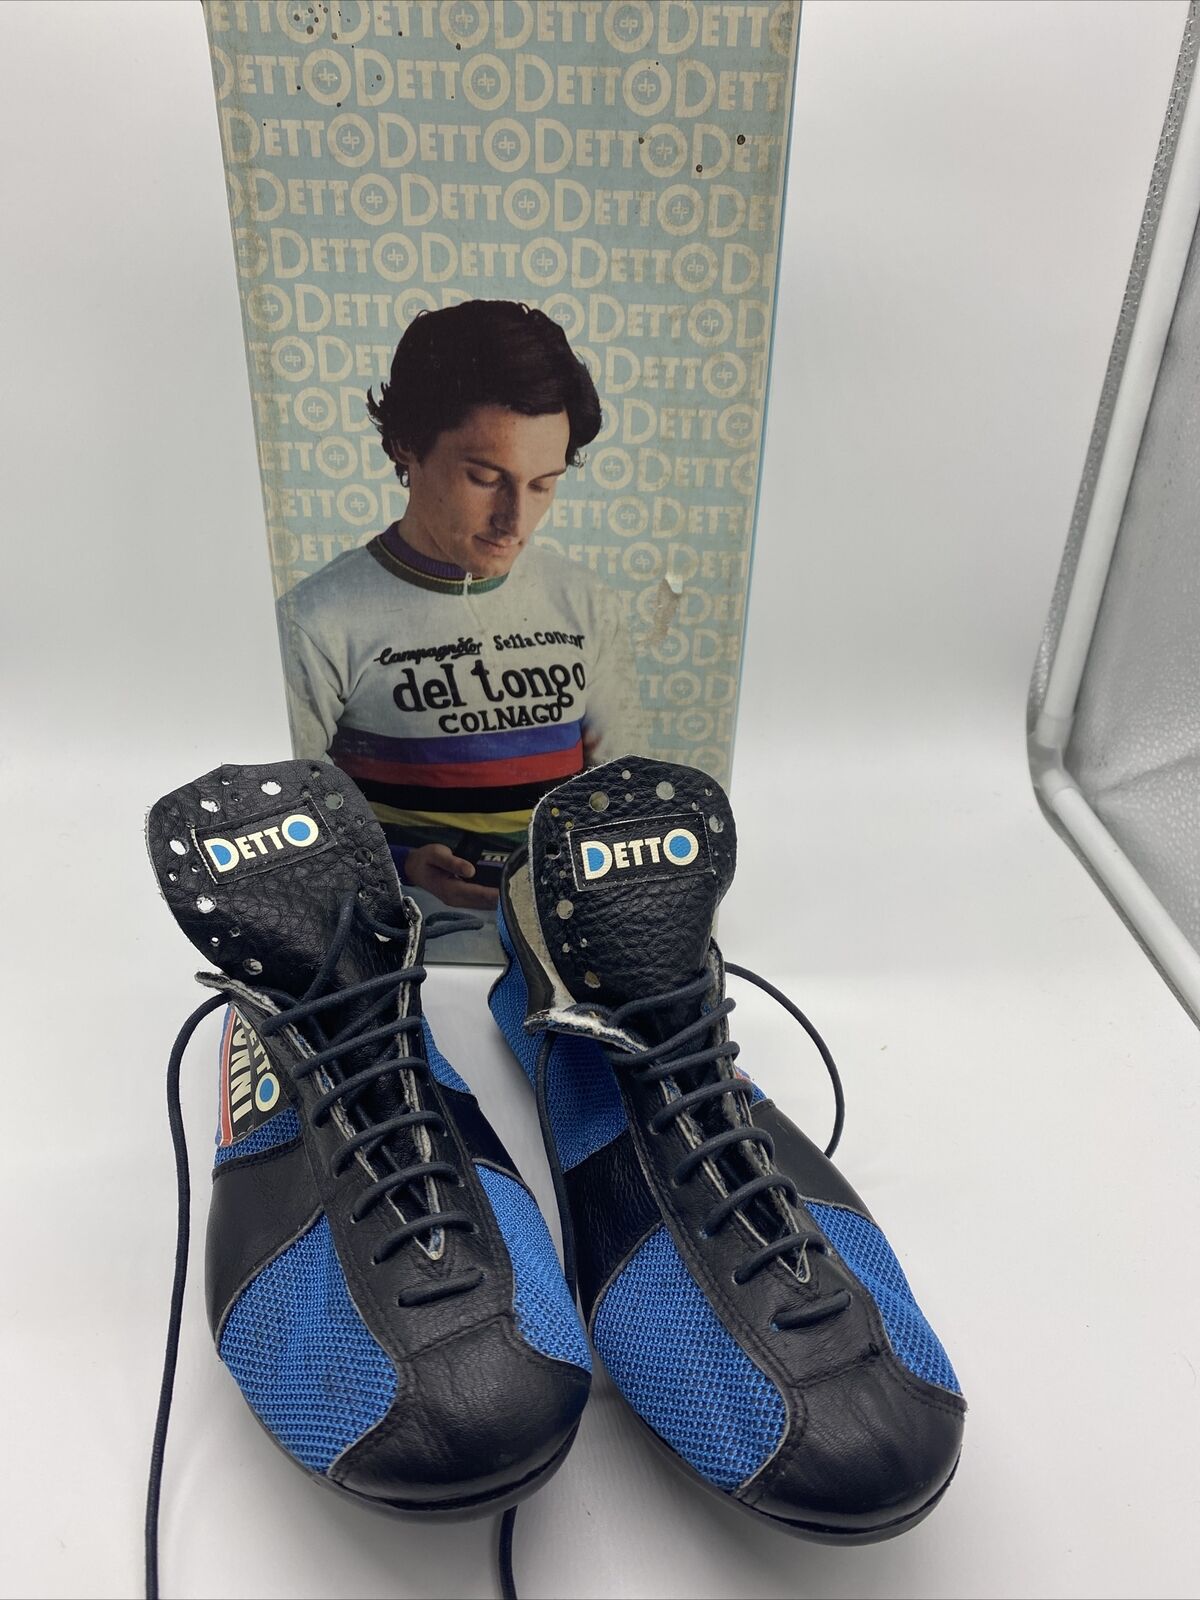 Vintage Nos New Detto Saronni Art. 88 Blue Leather Cycling Shoes 38 + Cleats